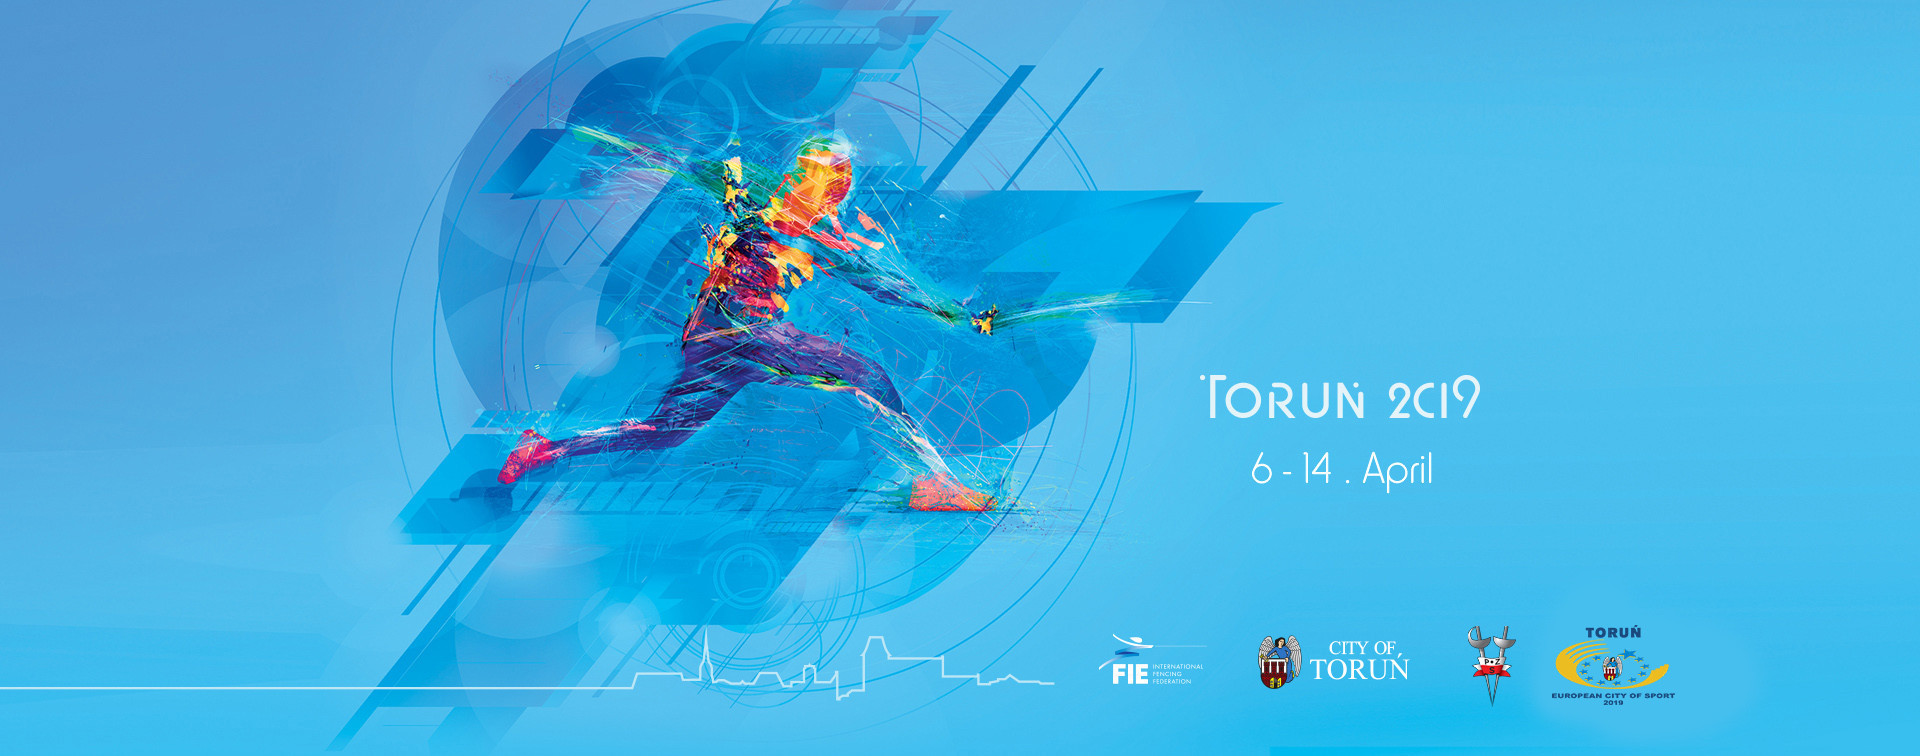 Toruń ready to host Junior and Cadet World Fencing Championships 